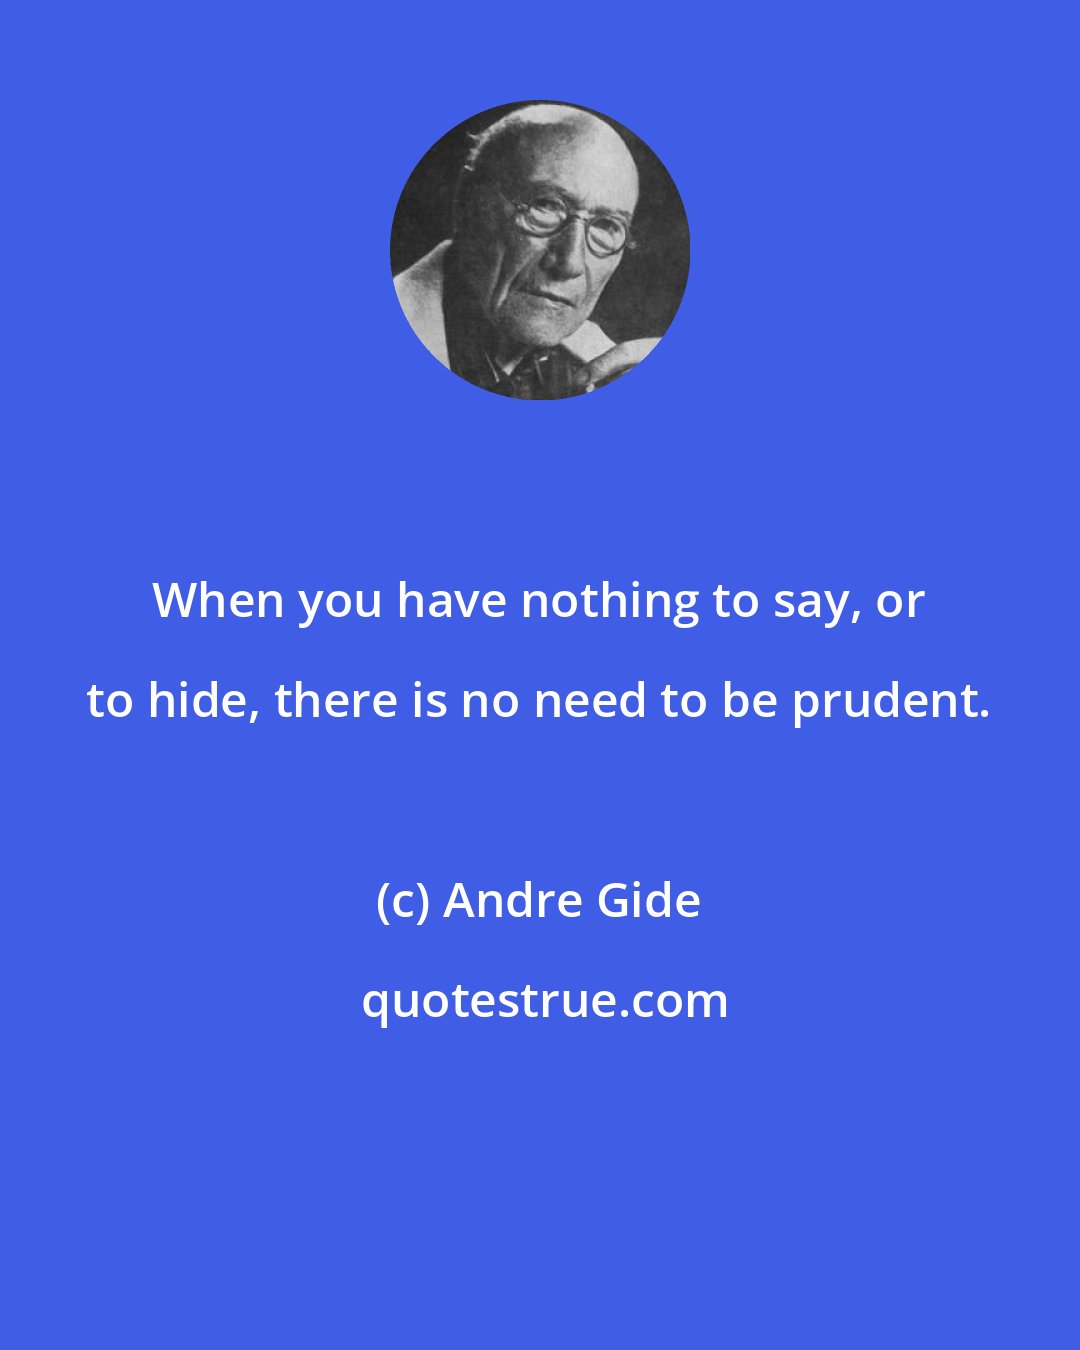 Andre Gide: When you have nothing to say, or to hide, there is no need to be prudent.